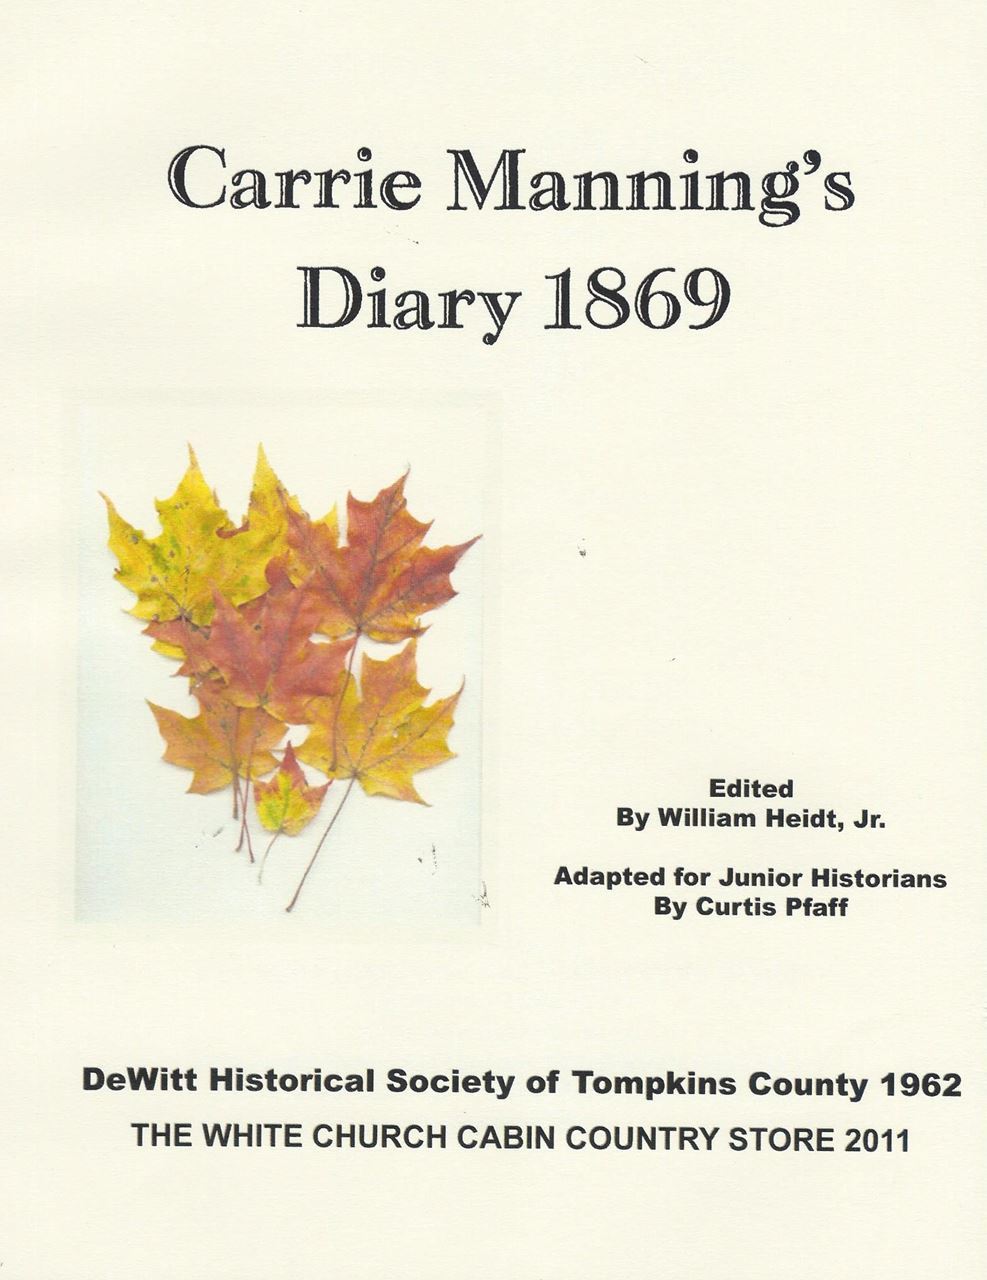 A picture of the cover of Carrie Manning's Diary. 